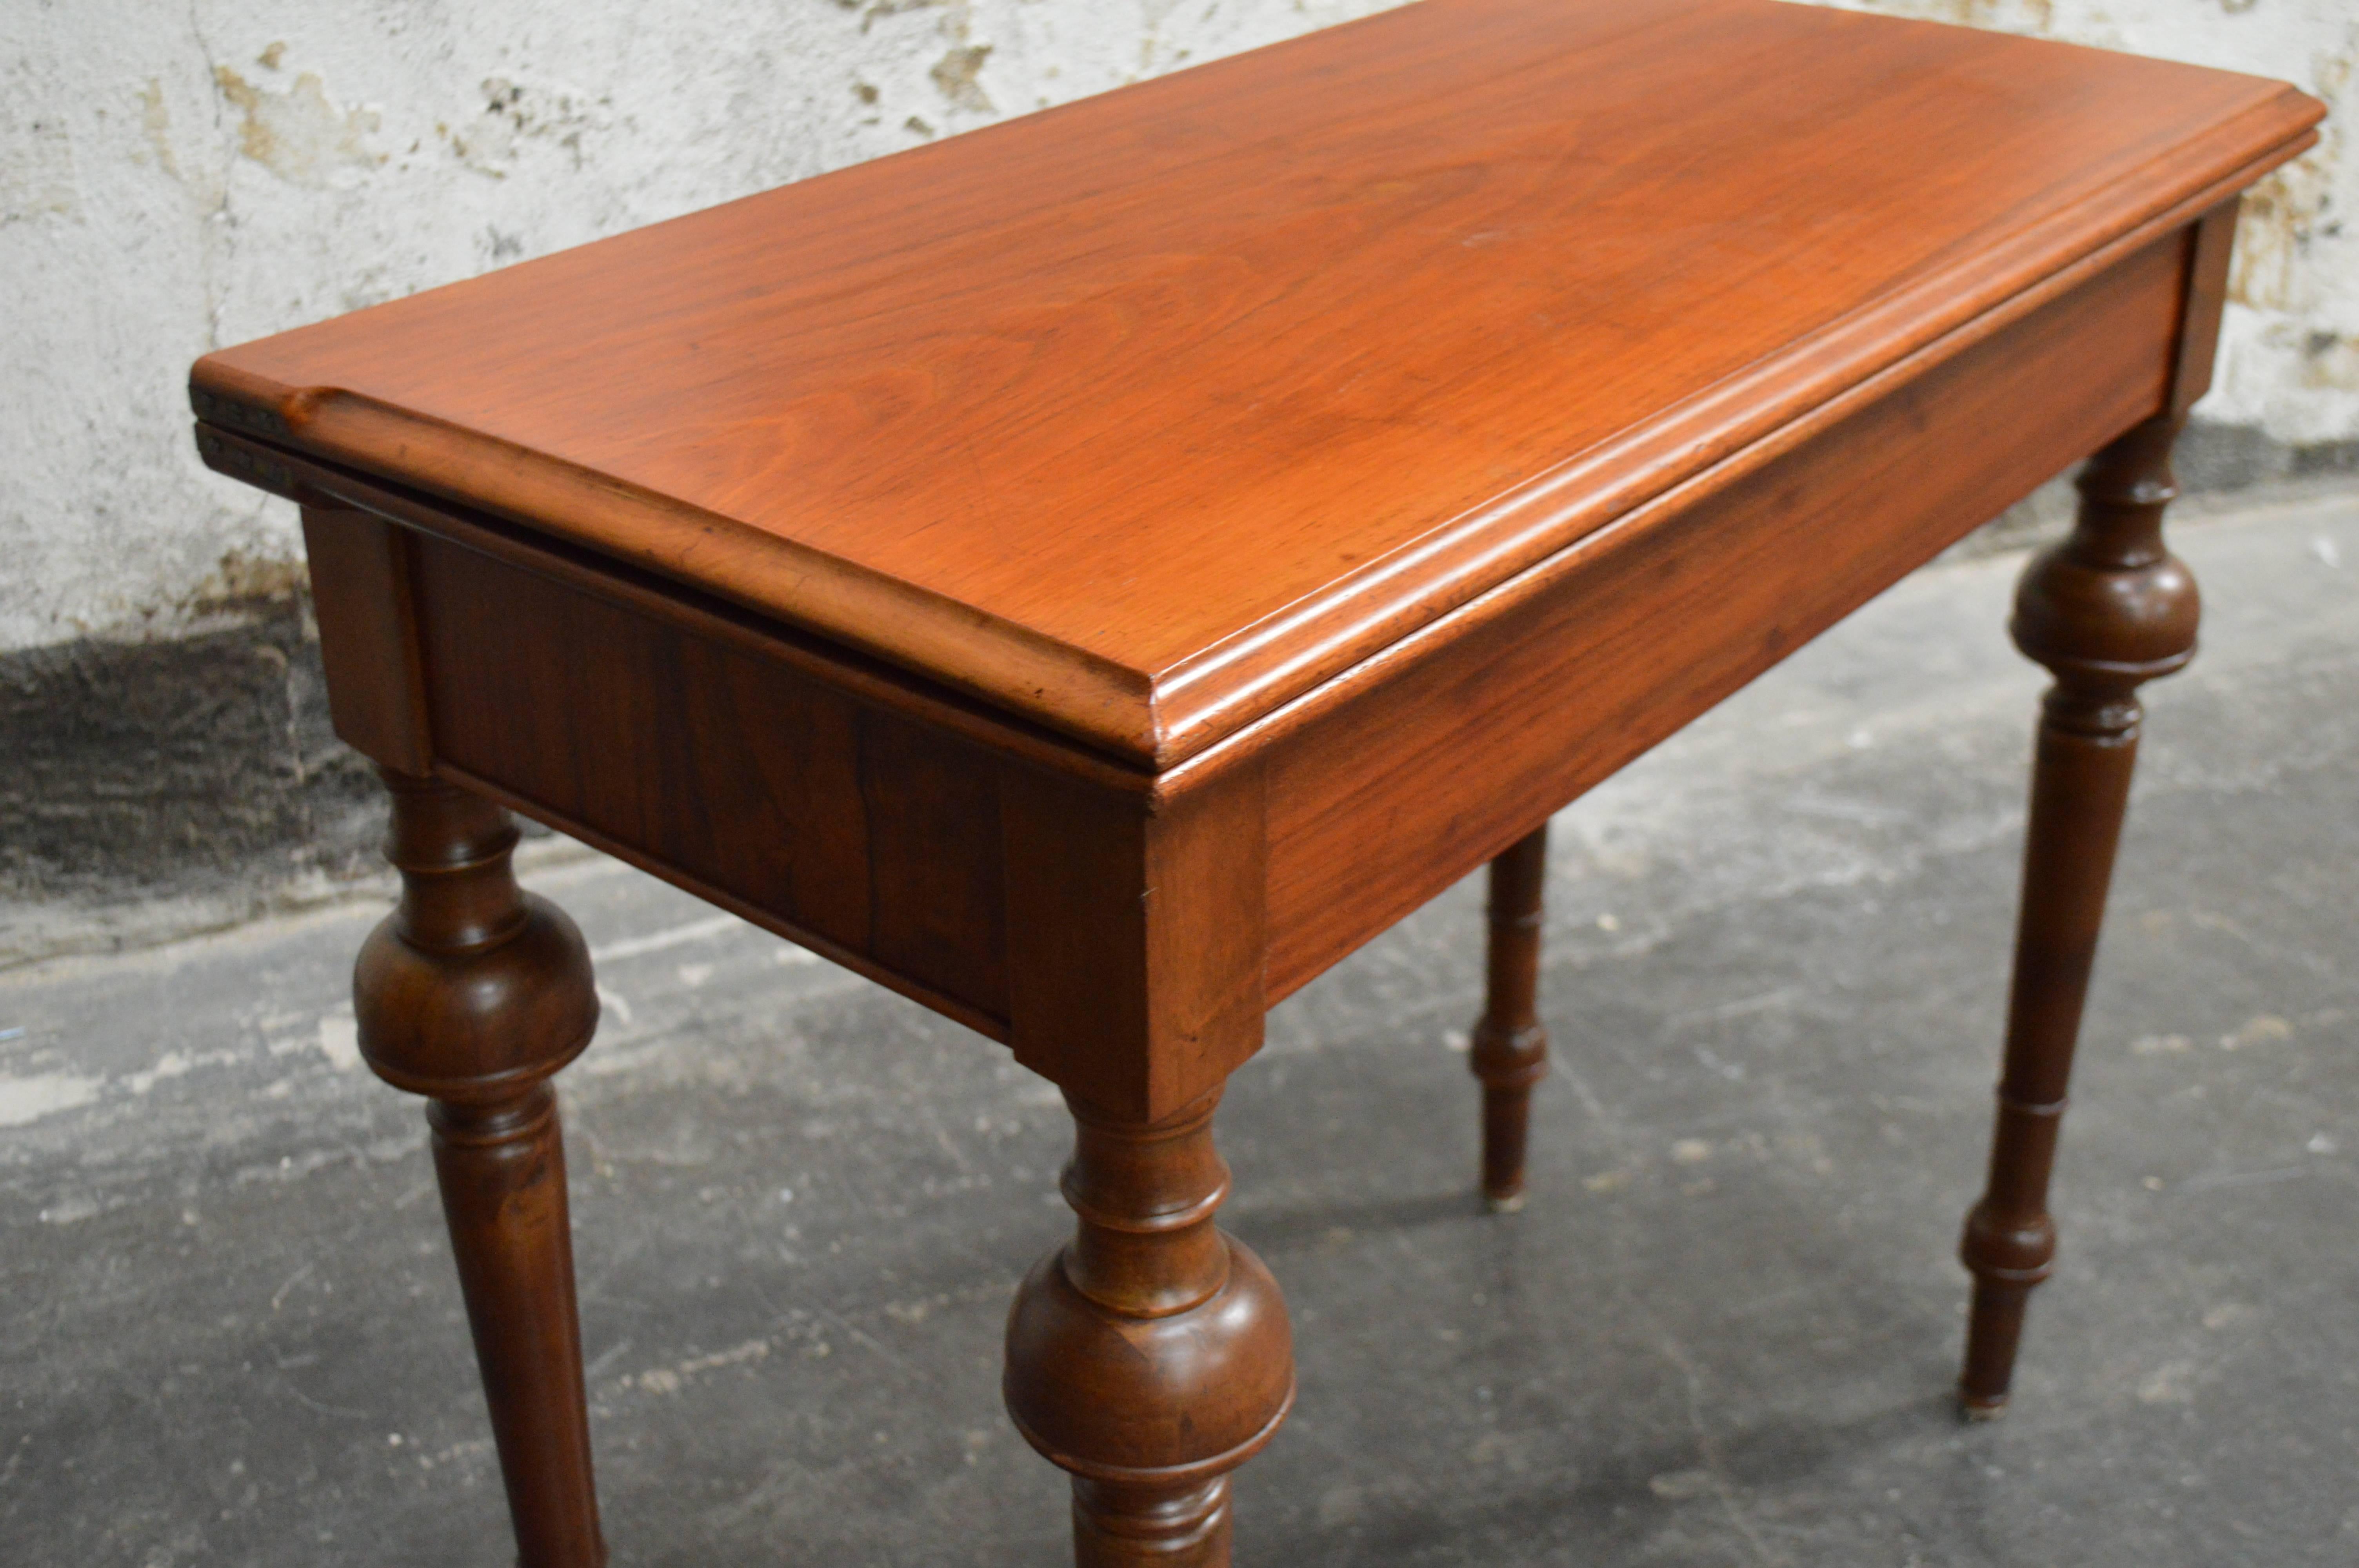 Swedish neoclassical mahogany console table that flips open to become a card table. If you take the top completely off it is a backgammon game inside. Interesting legs, clean and handsome design. 

When the tabletop is folded it is 17.5